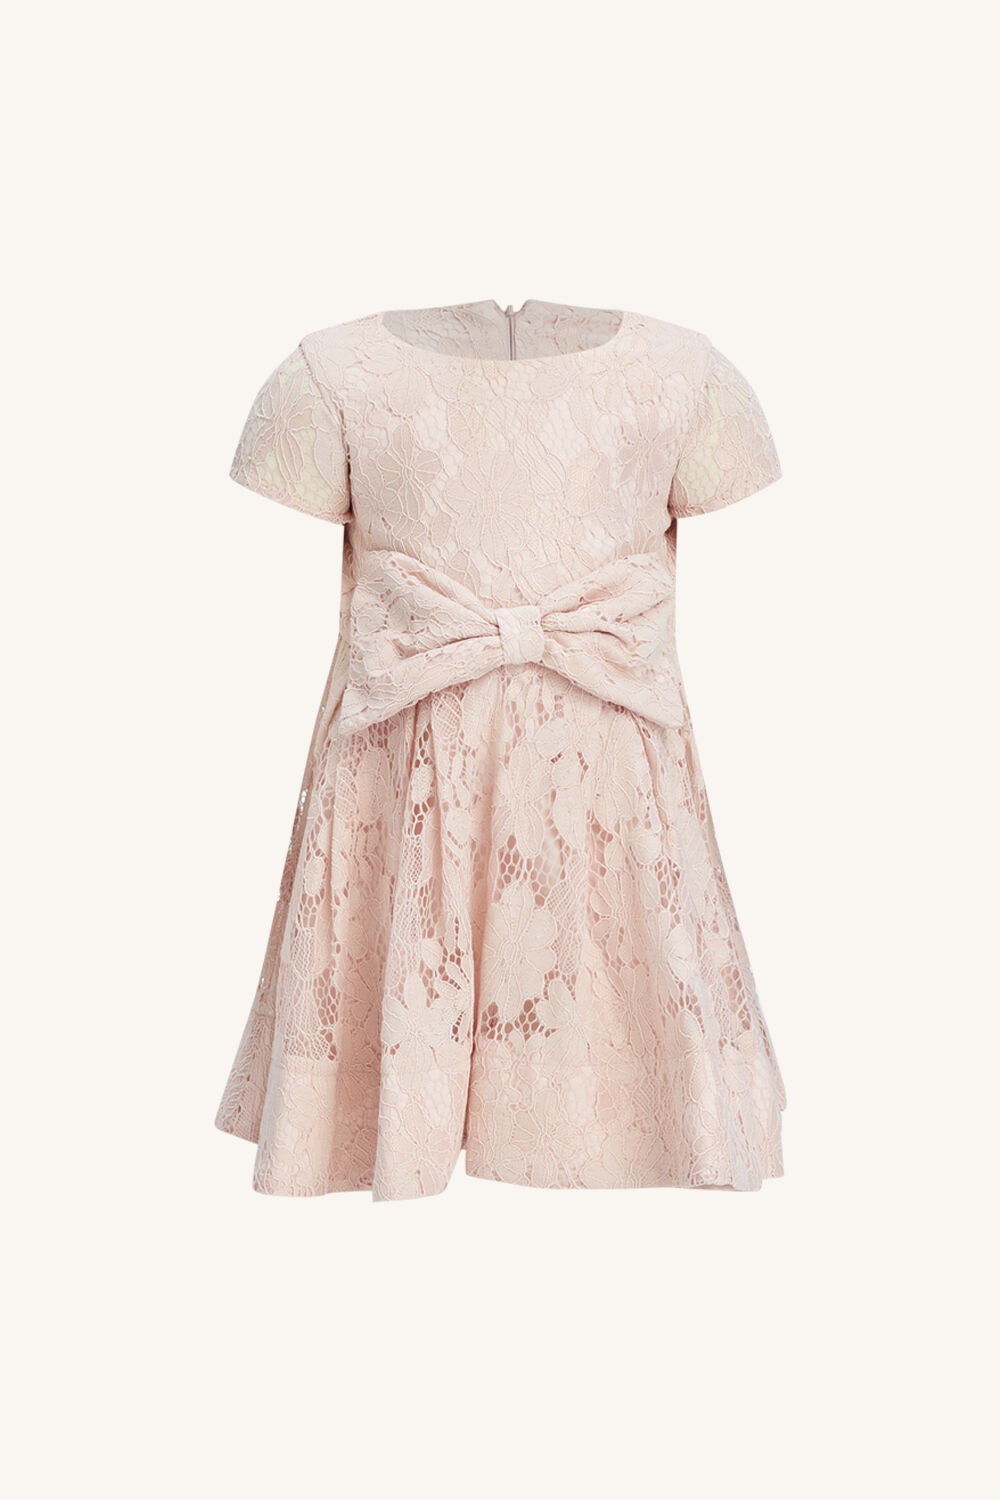 BABY GIRL MIRELA LACE BOW DRESS in colour SOFT PINK